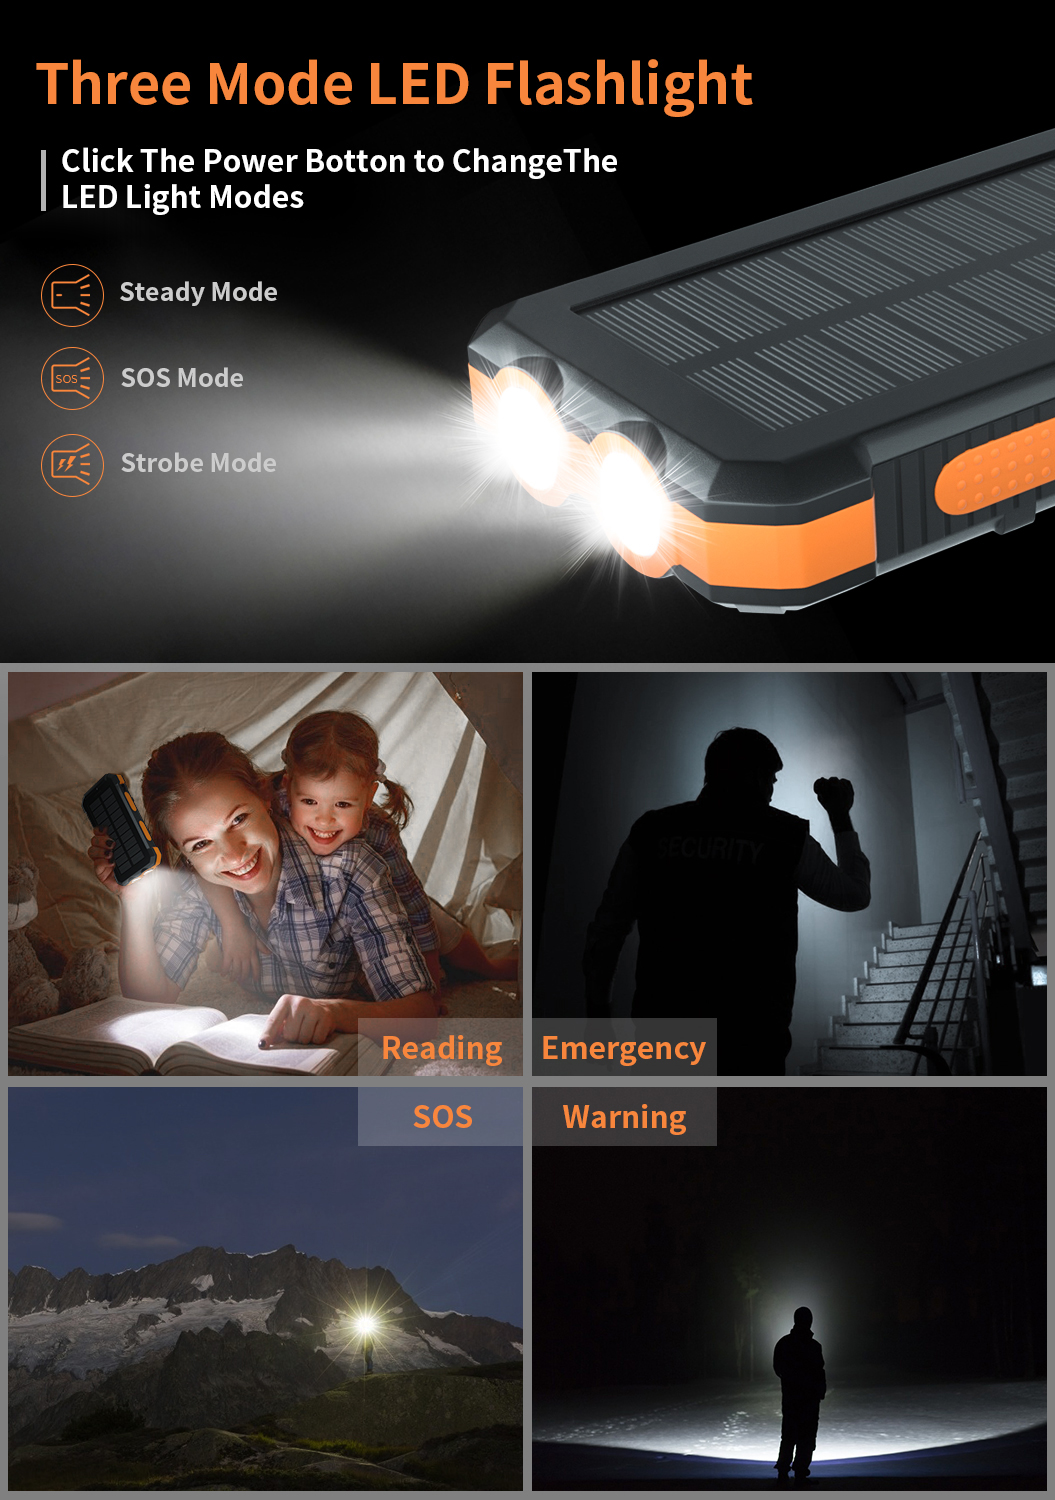 SOLPOWBEN 30000mAh Solar Charger for Cell Phone iPhone, Portable Solar Power Bank with Dual 5V USB Ports, 2 Led Light Flashlight, Compass Battery Pack for Outdoor Camping Hiking (Orange) - image 4 of 8